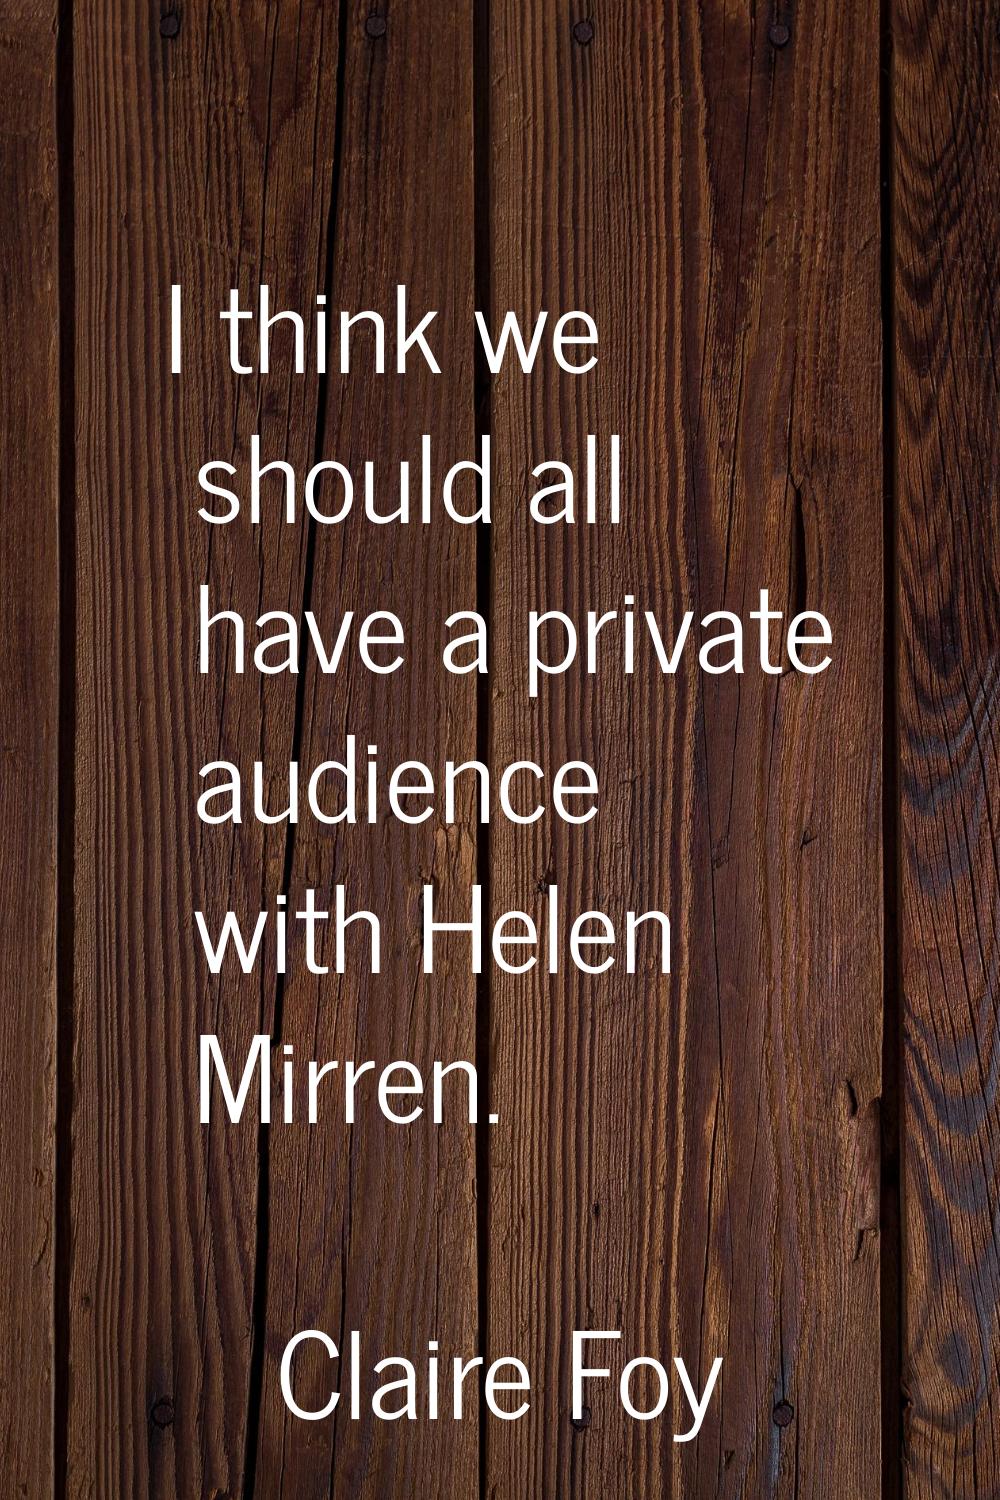 I think we should all have a private audience with Helen Mirren.